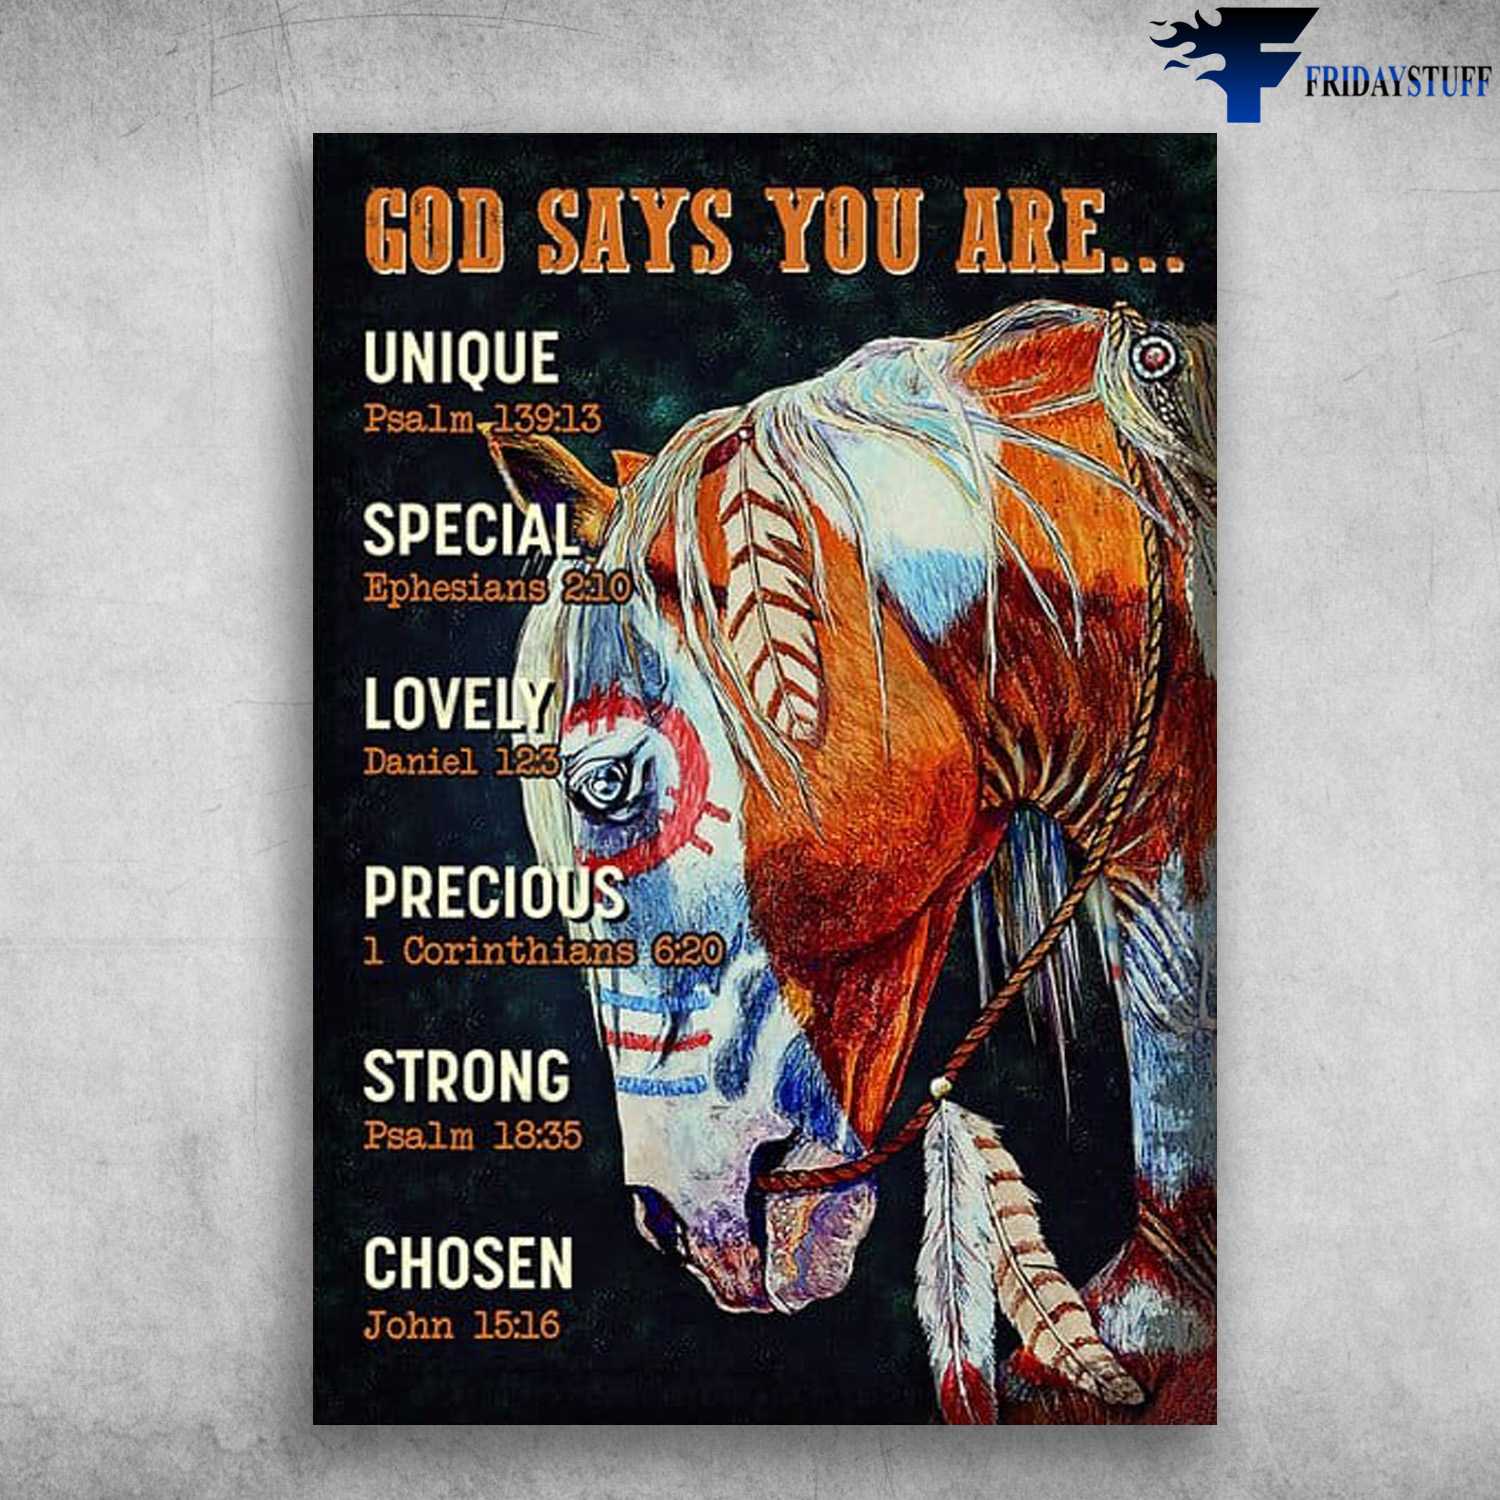 Horse Poster, God Says You Are, Unique, Special, Lovely, Precious, Strong, Chosen